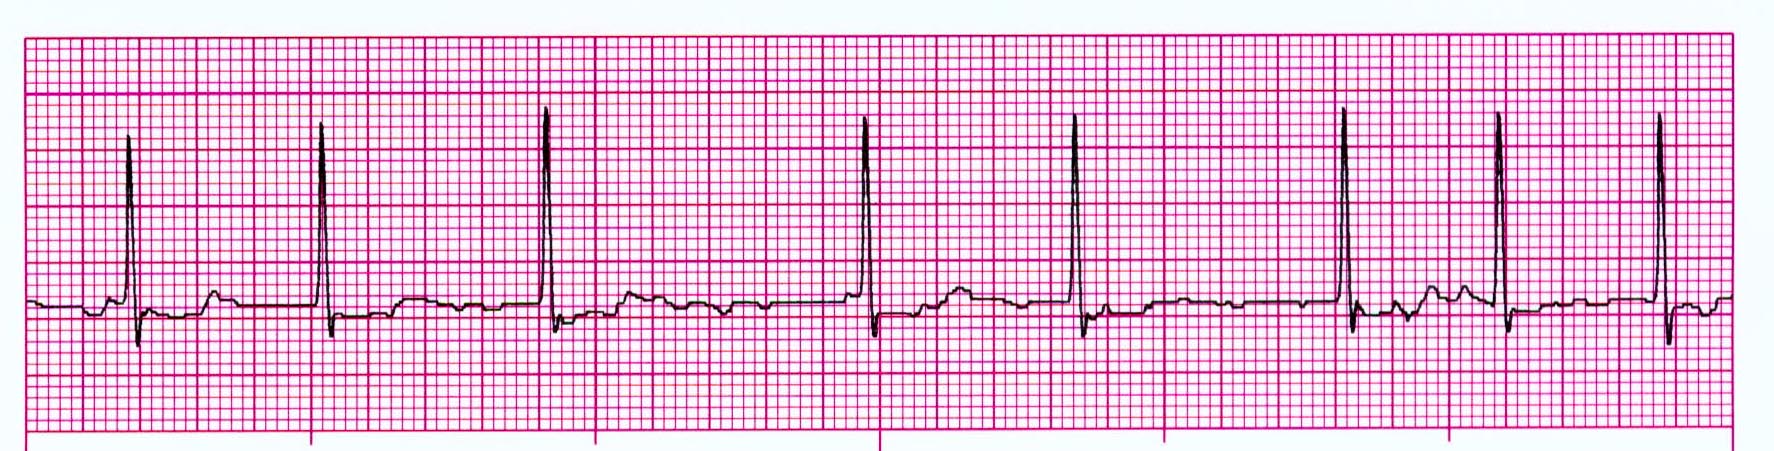 Heart rhythm for a diver with Atrial Fibrillation, also known as AFib